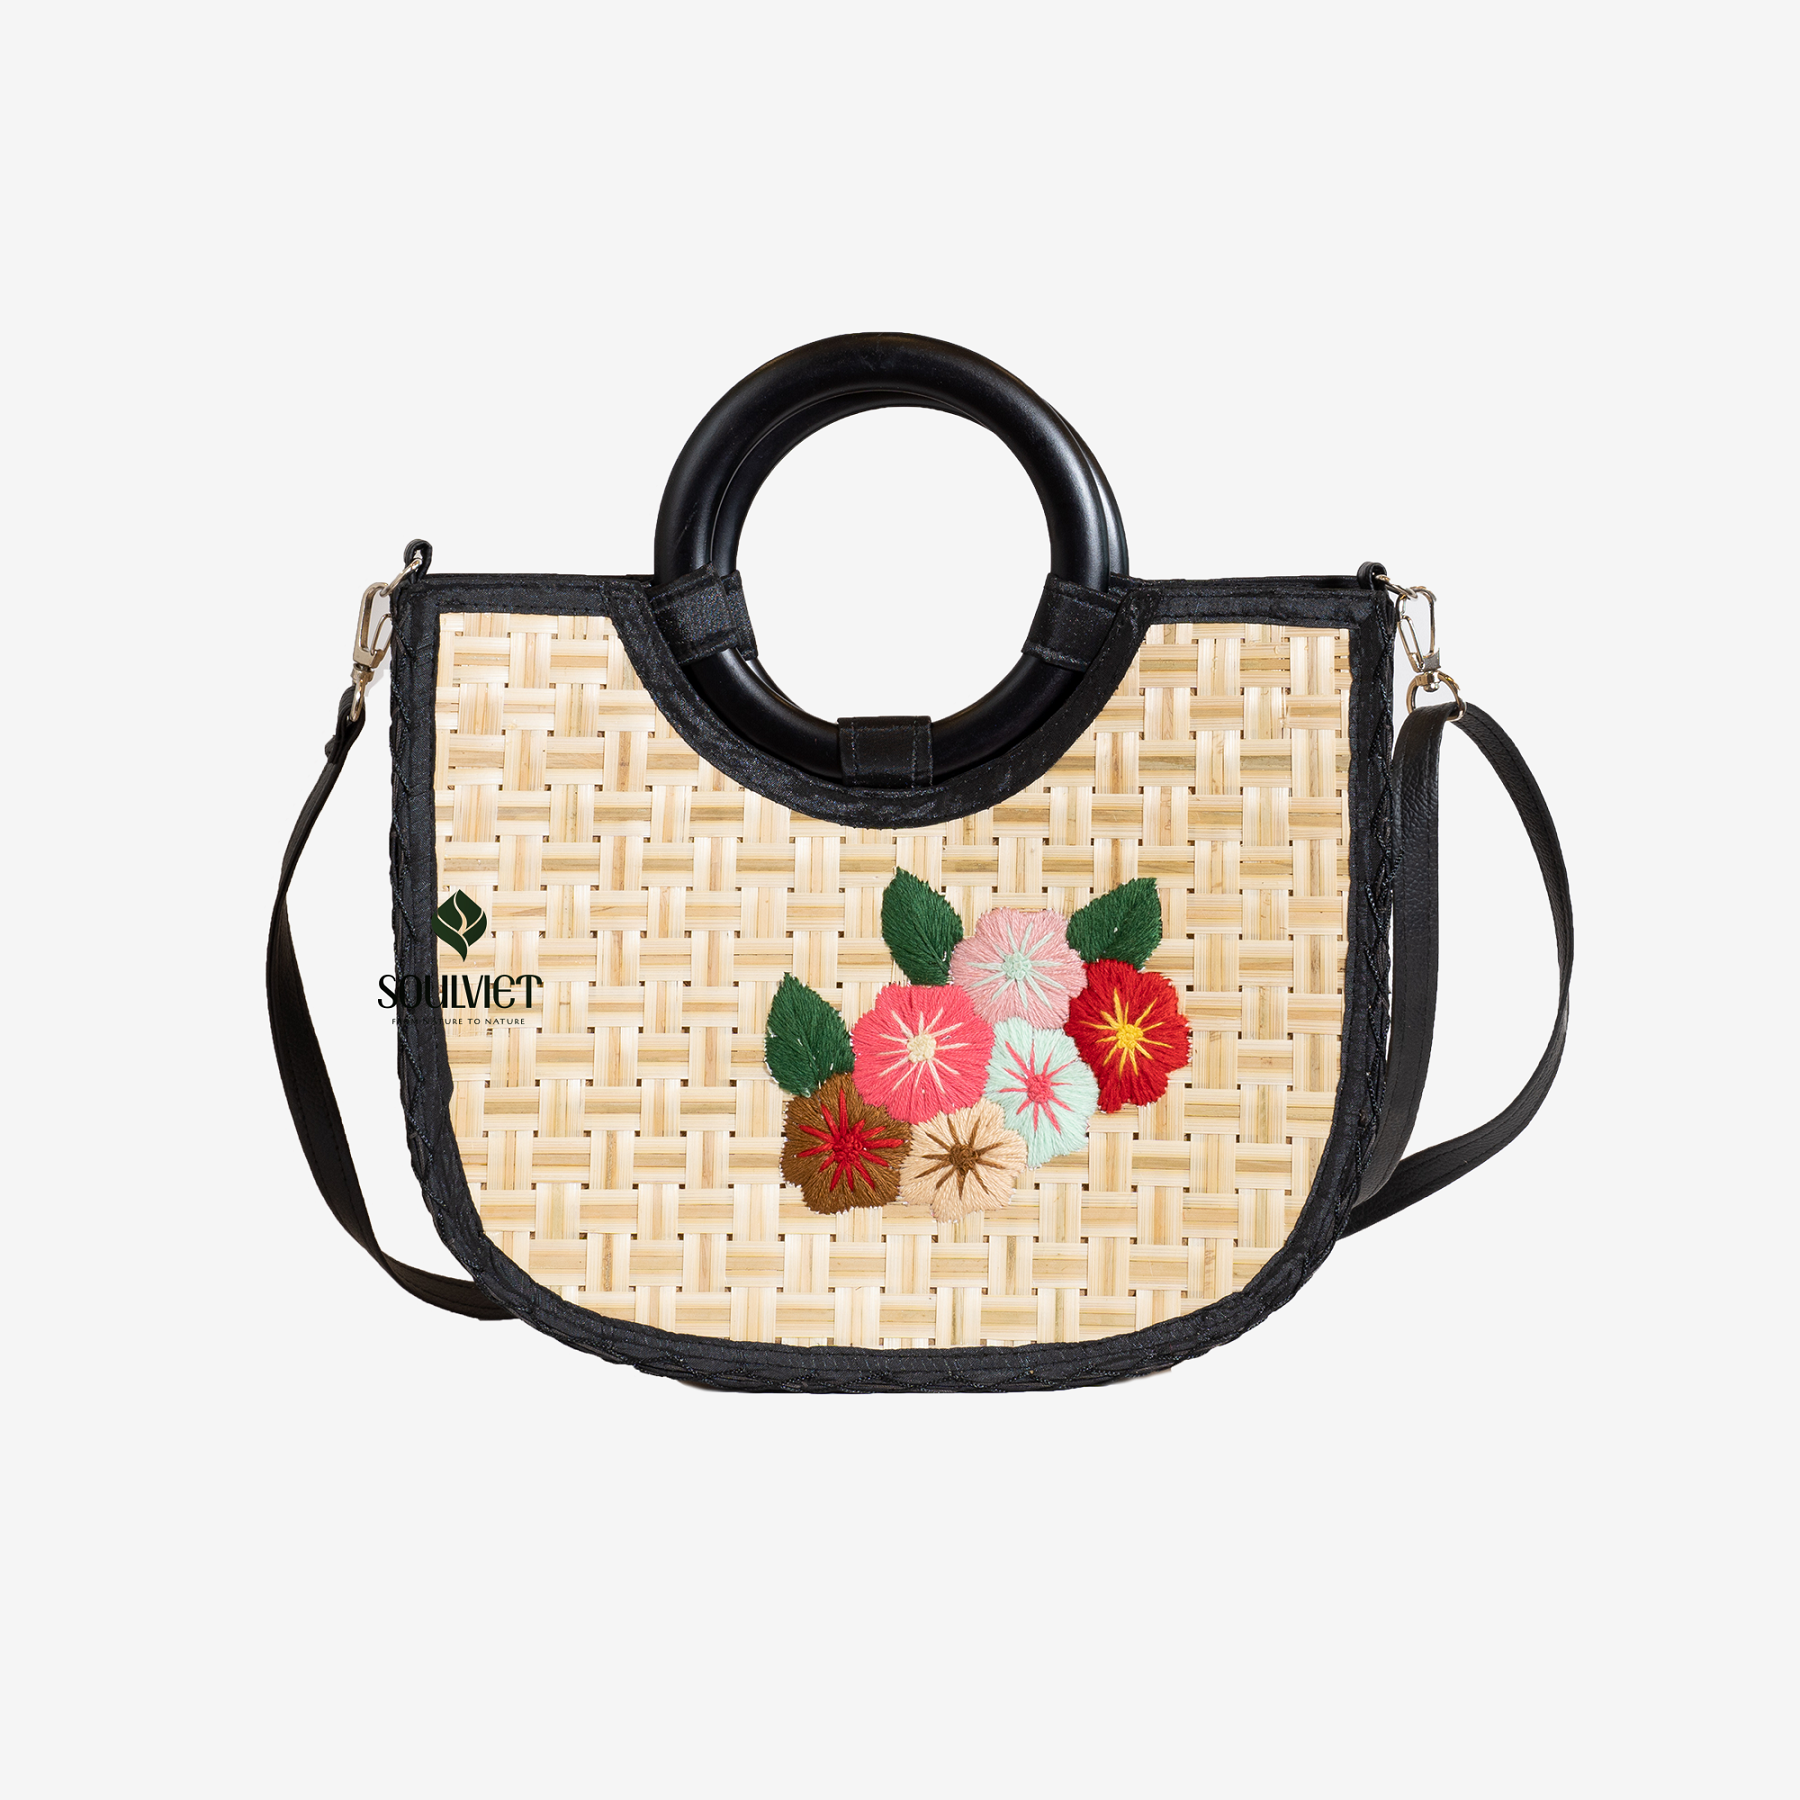 Fashionable Bamboo Handbag, with embroidered colorful flowers